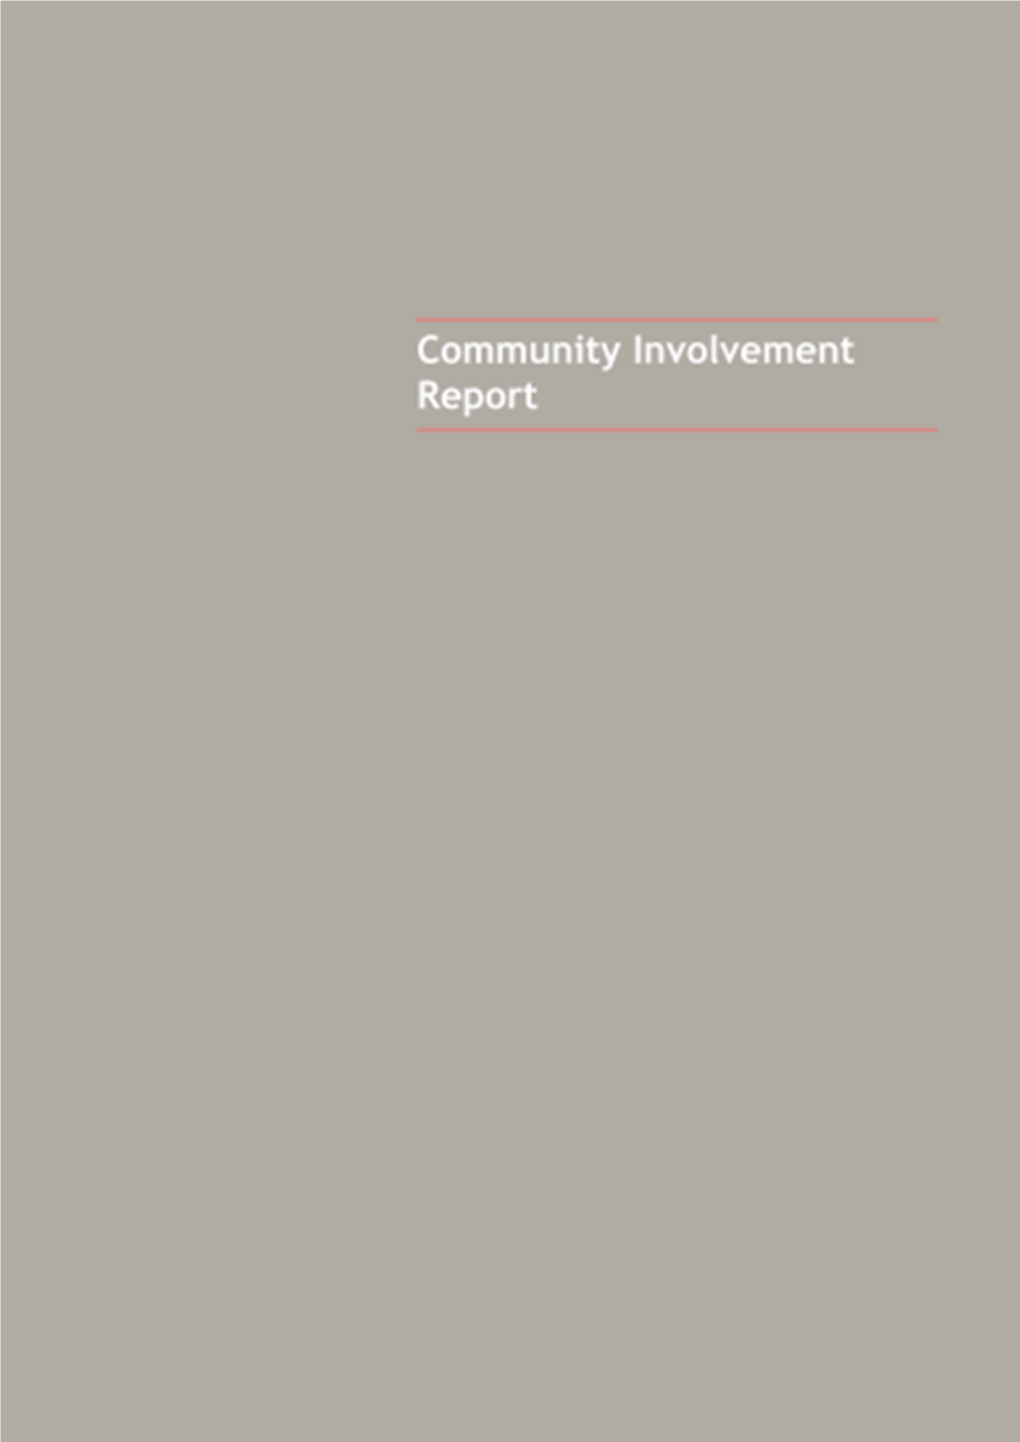 Statement of Community Involvement (Adopted November 2006), and the London Borough of Islington’S Statement of Community Involvement (Adopted July 2006)